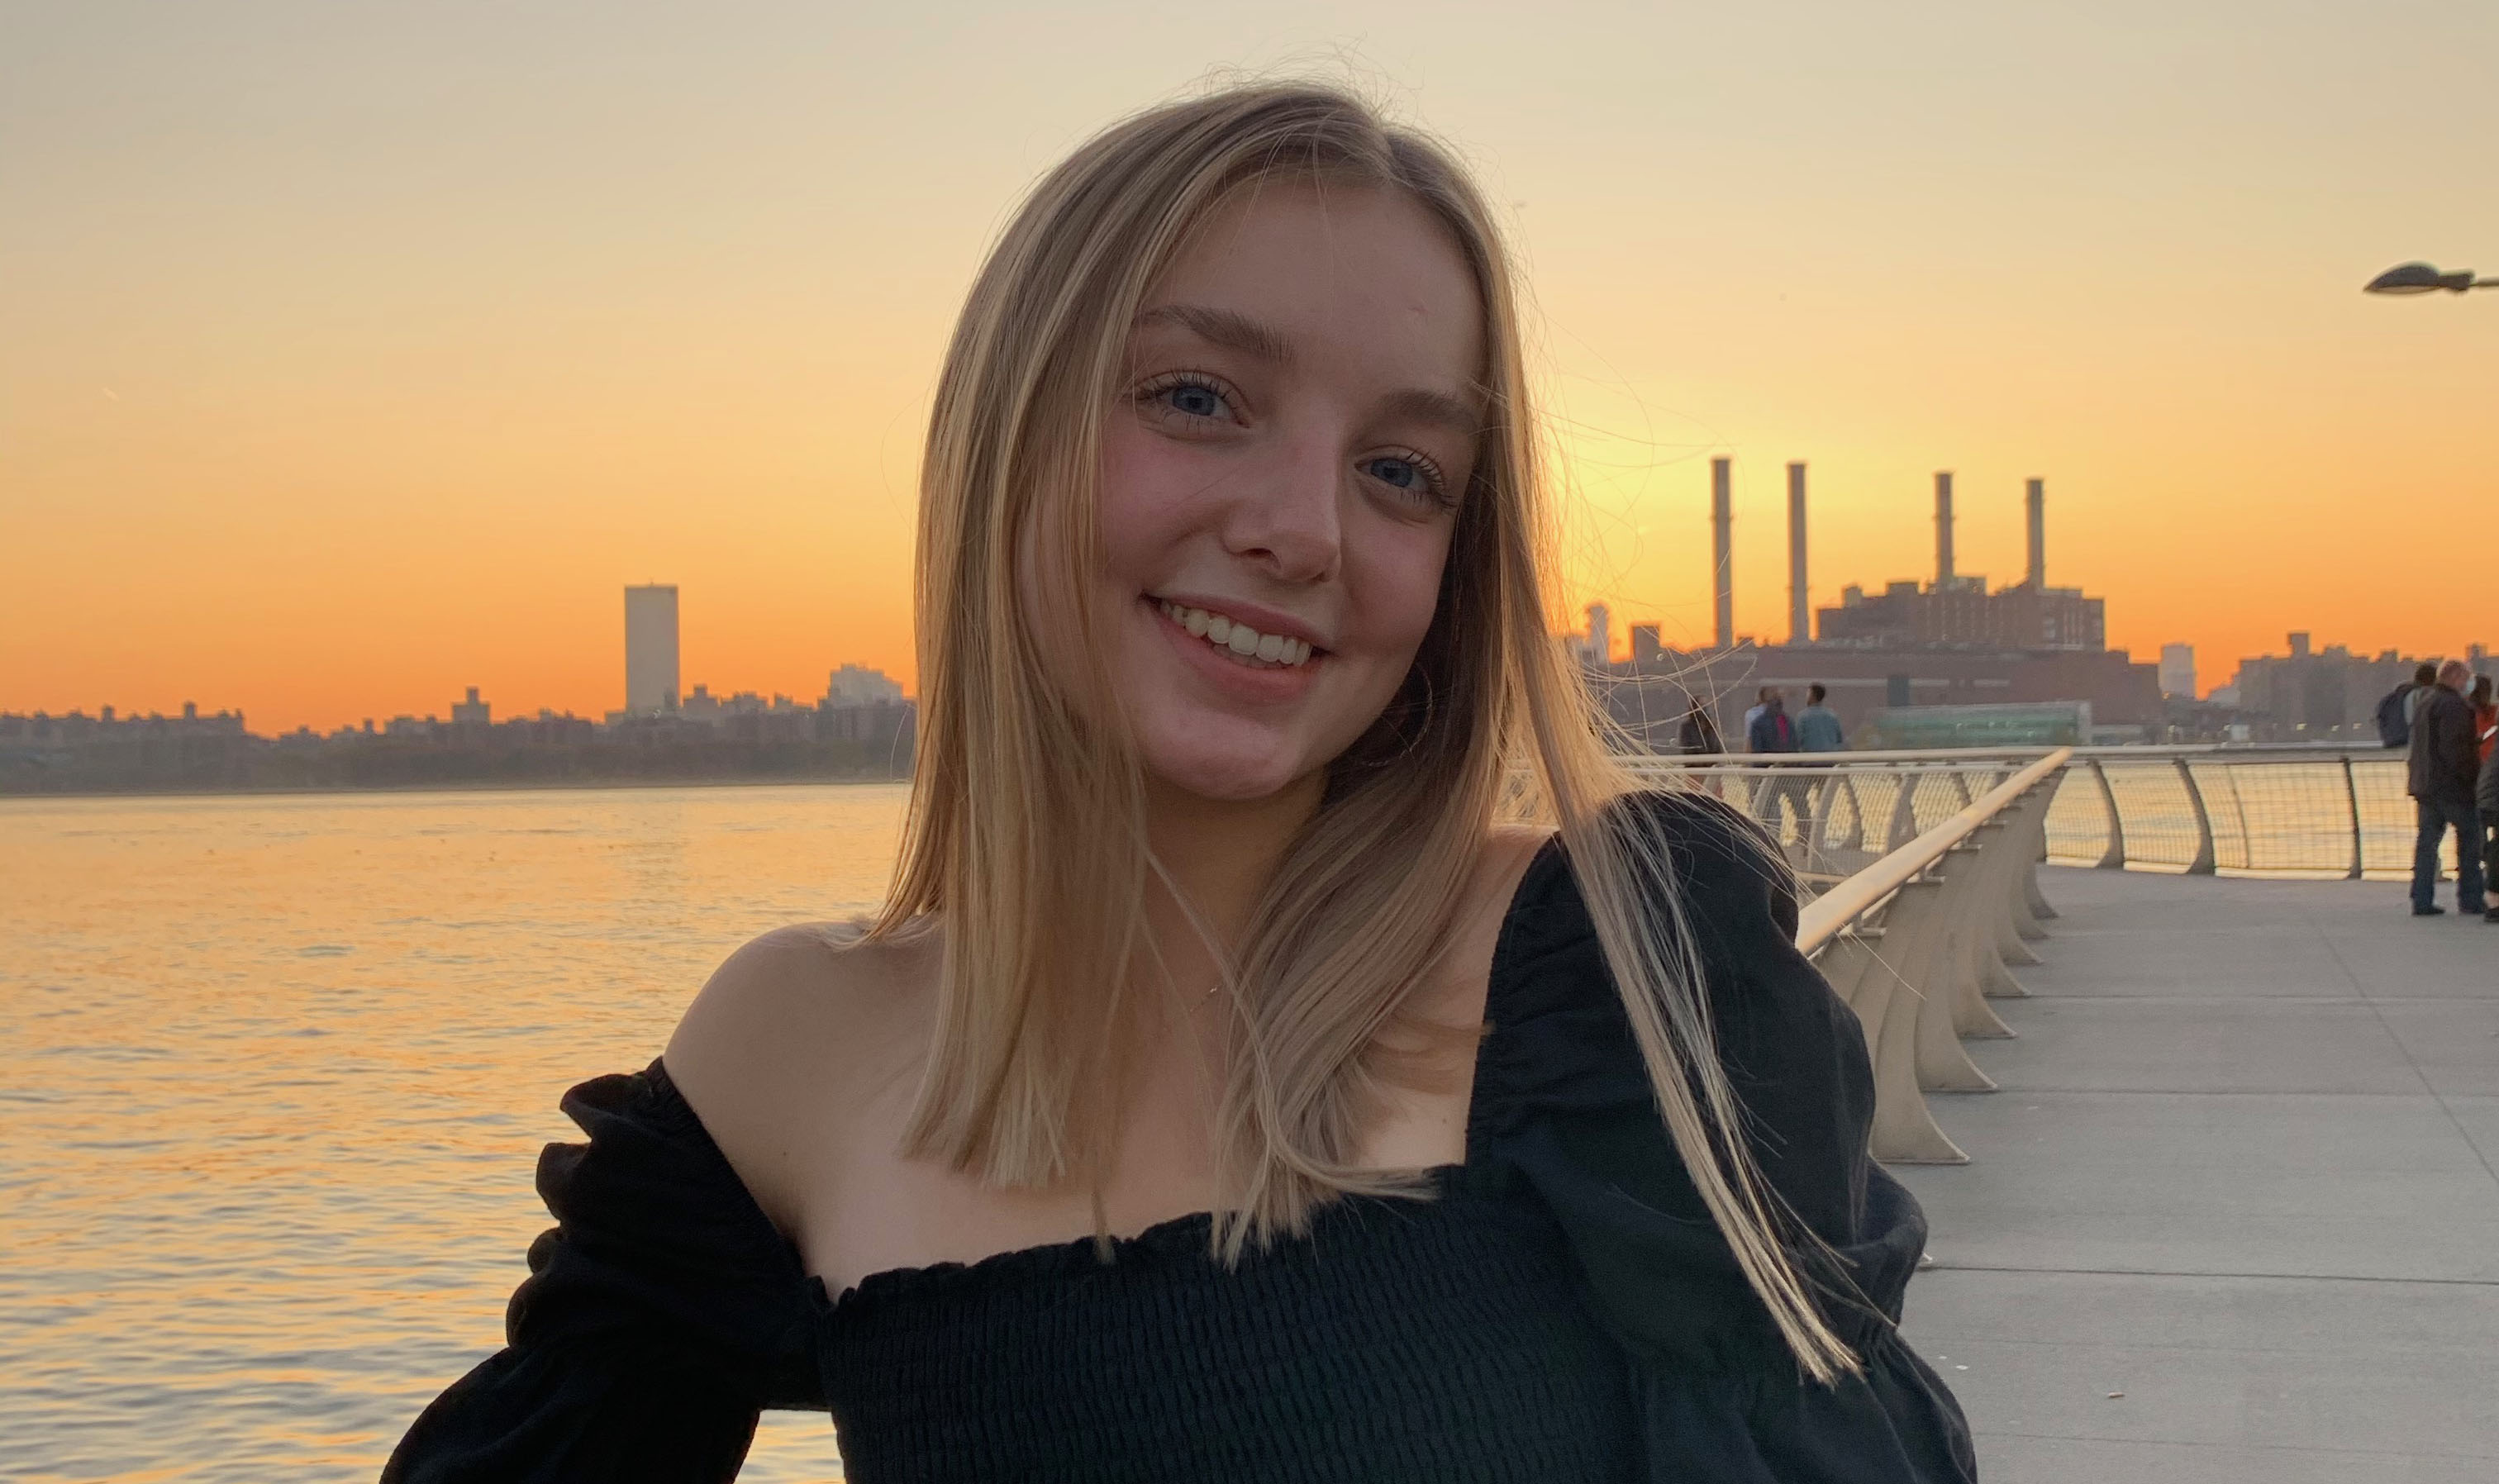 young woman standing on a pier with cityscape and sunset in background